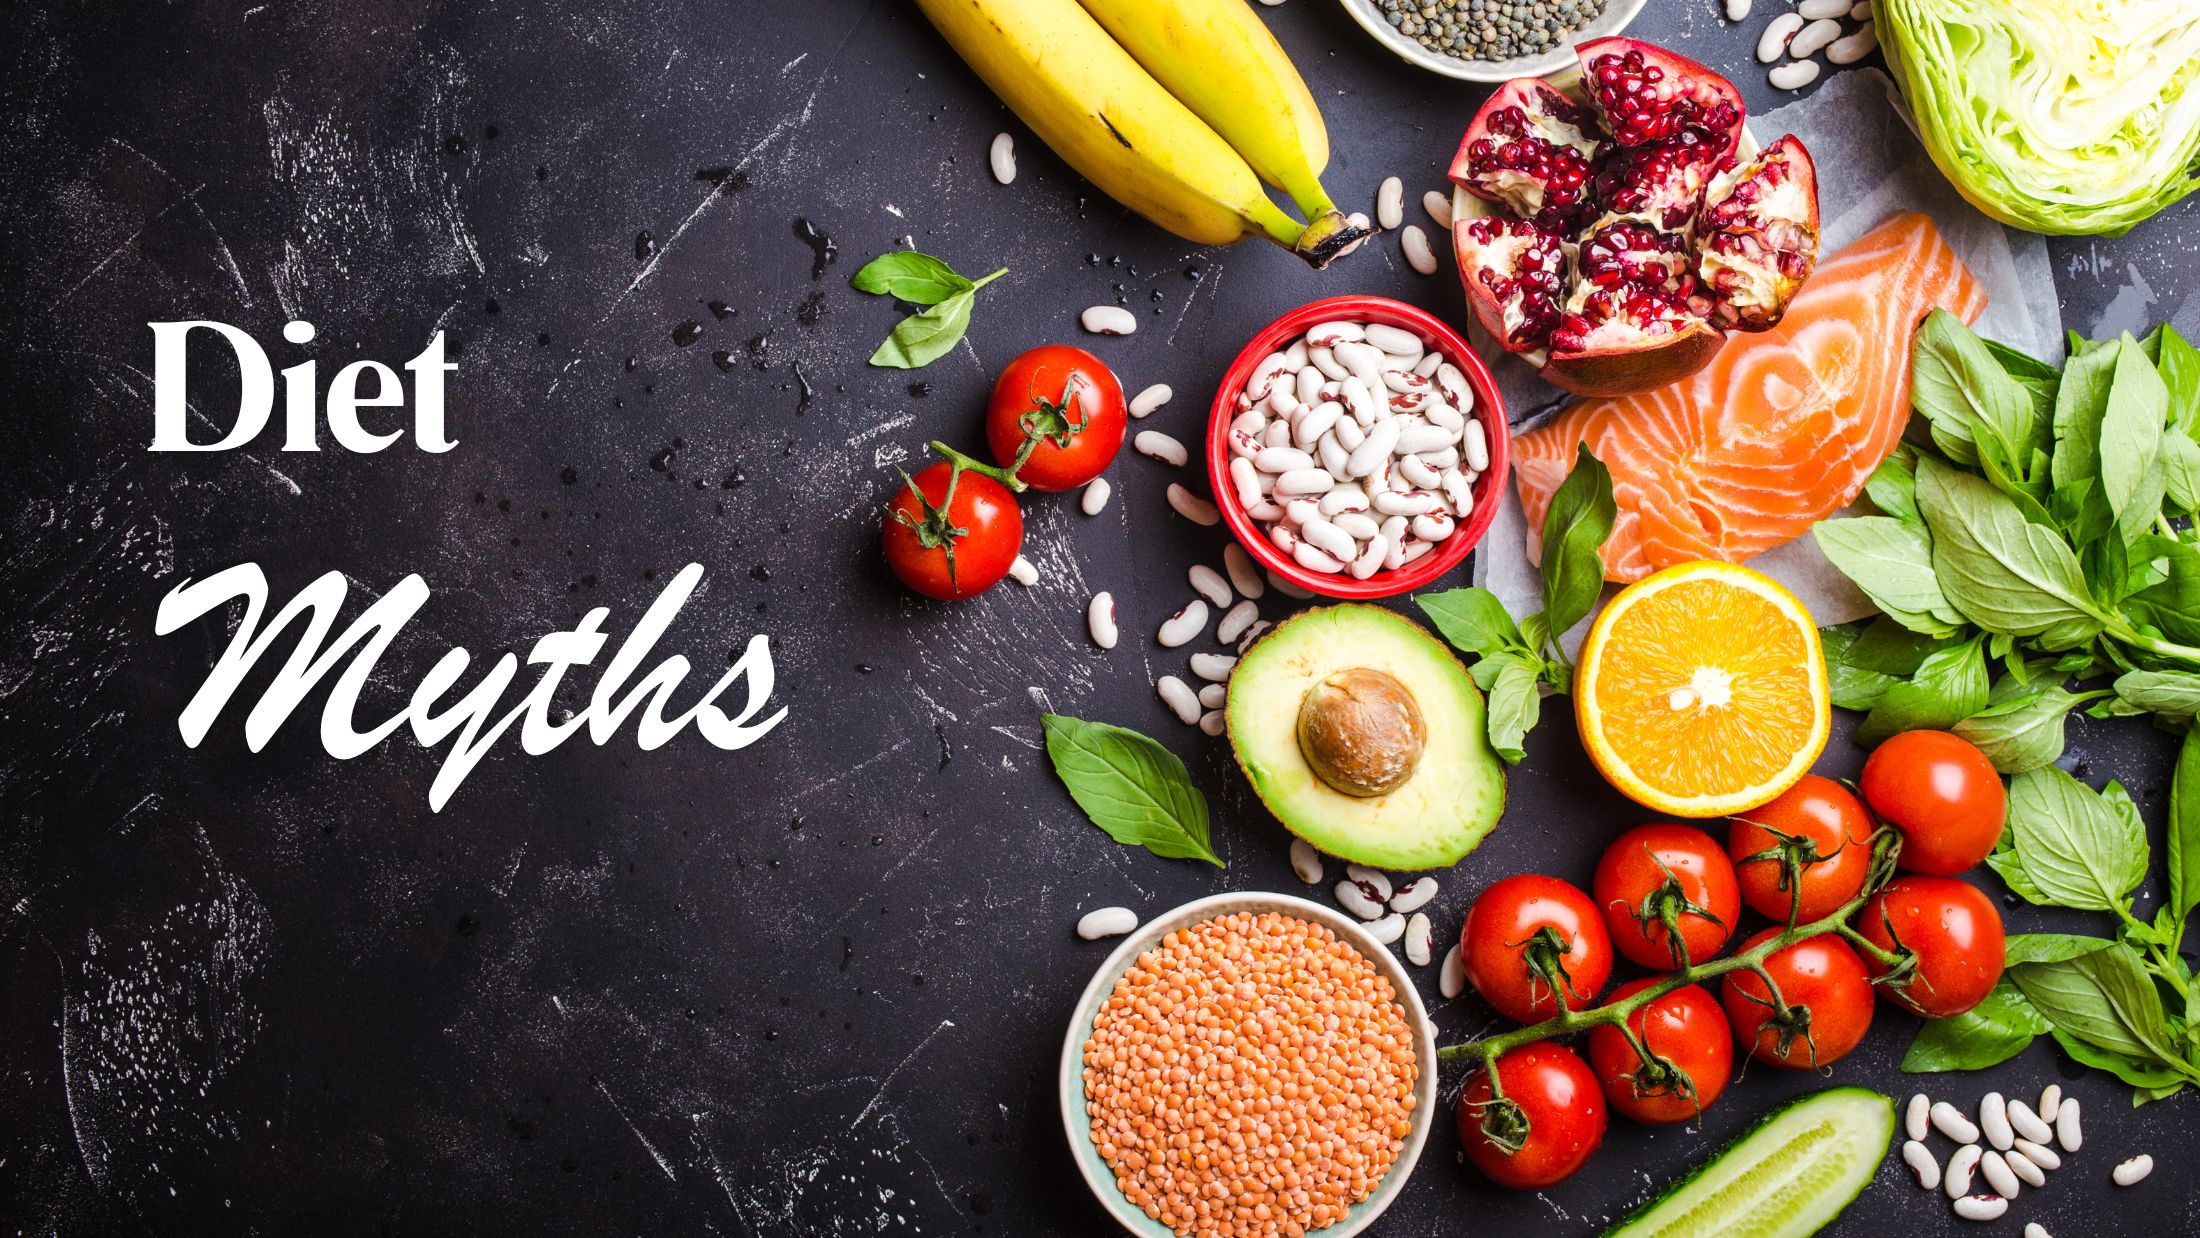 Diet Myths label next to a colorful set of fruits and vegetables